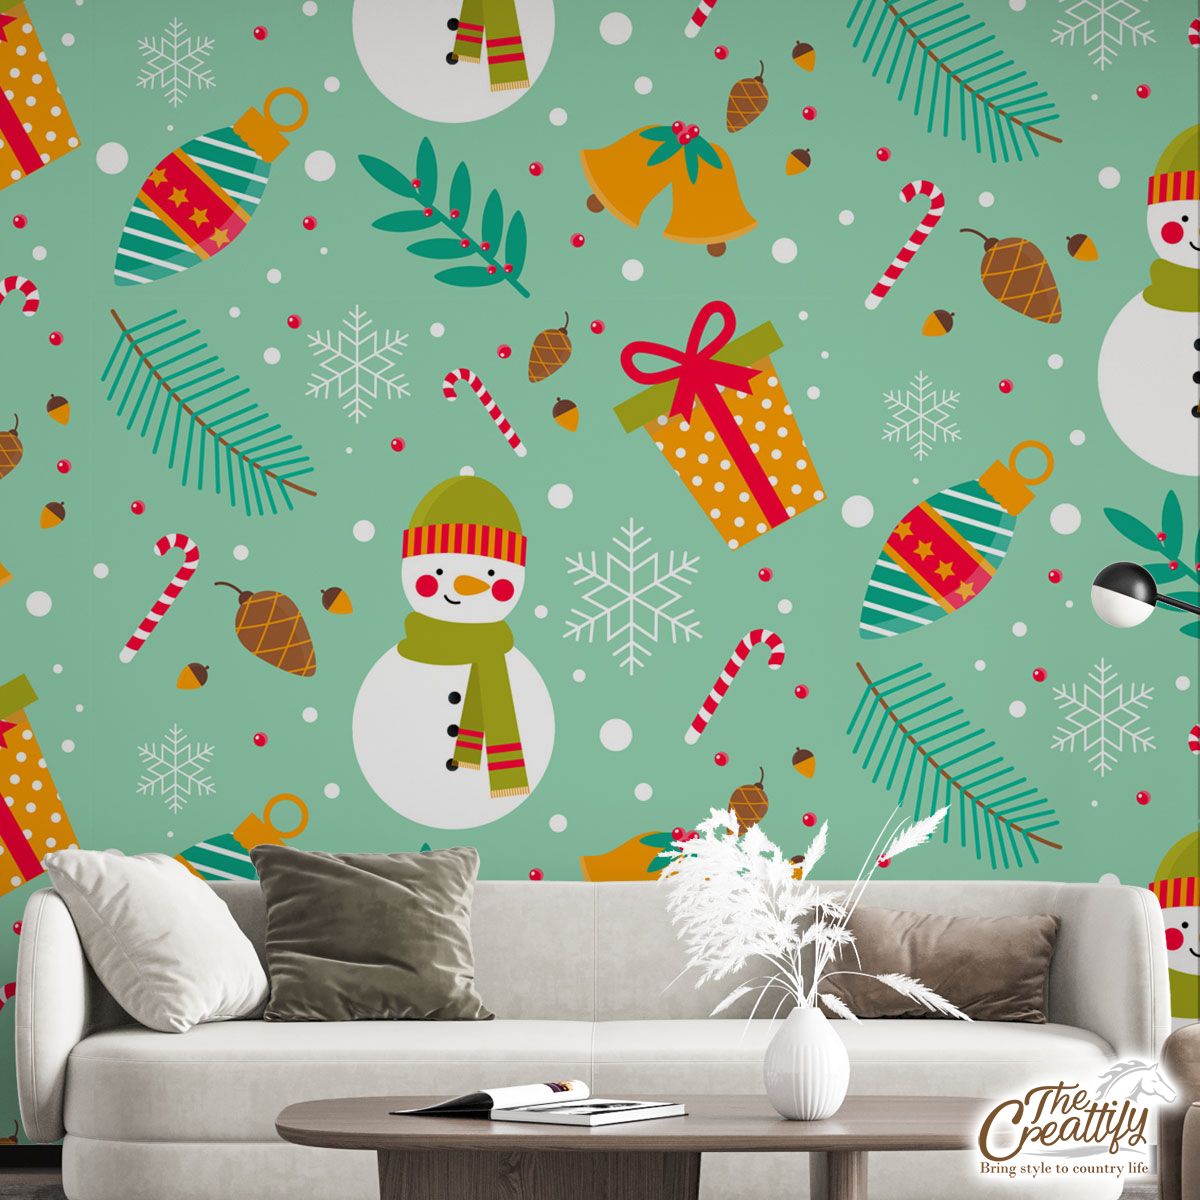 Snowman With Christmas Bells Pattern Wall Mural